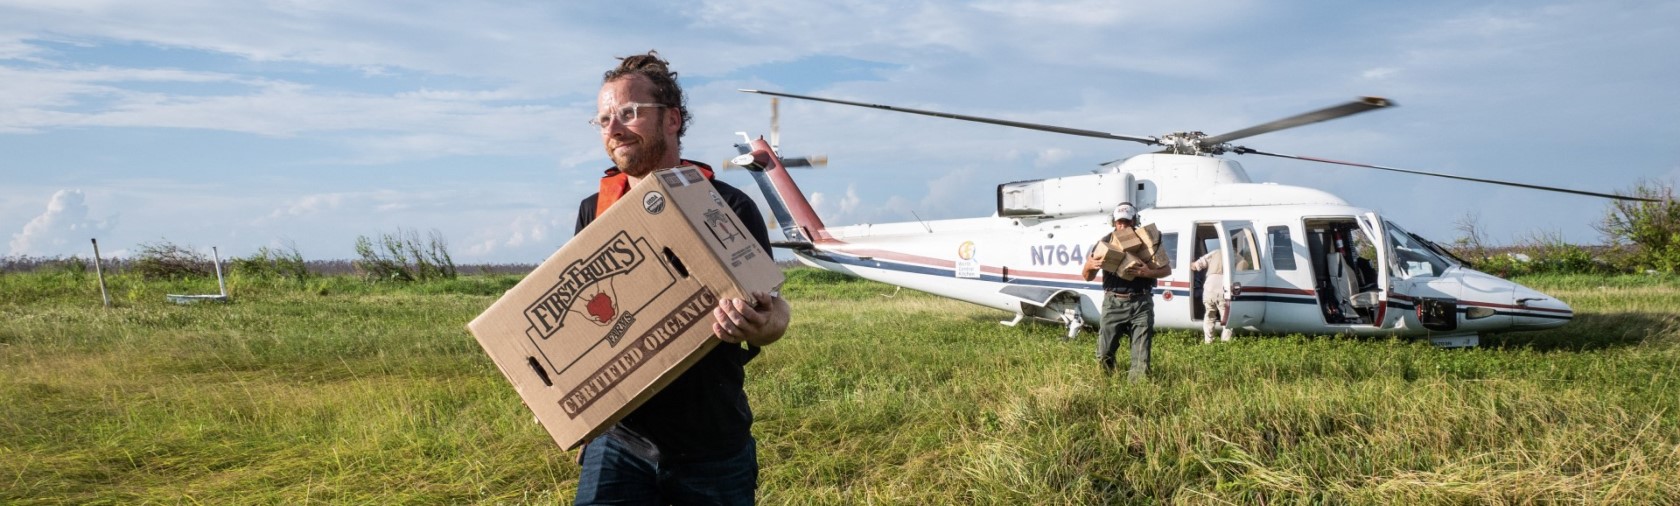 Man carrying food box from helicopter